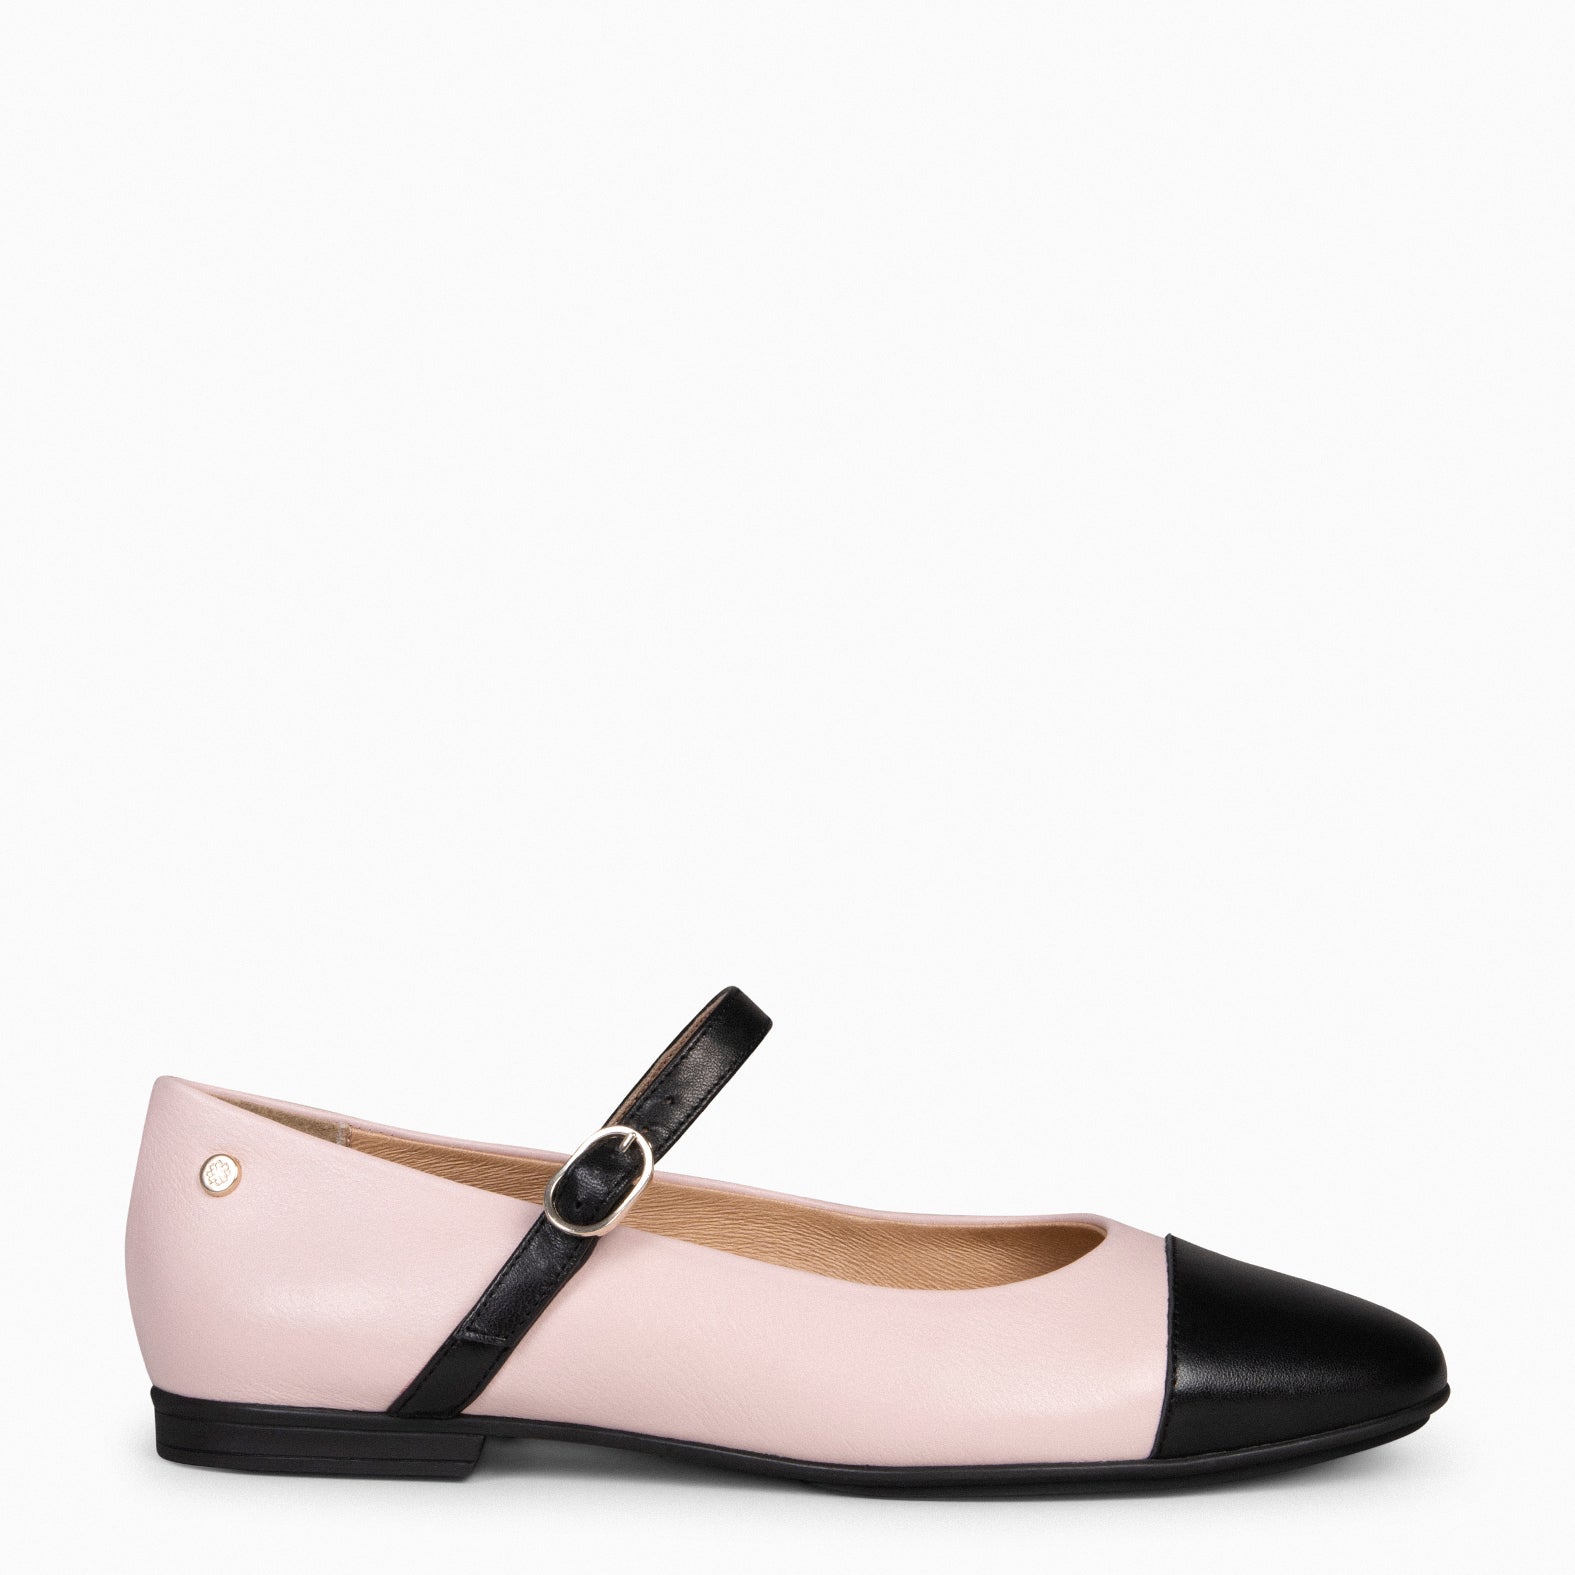 MORGANE - NUDE FLAT SHOES WITH BUCKLE